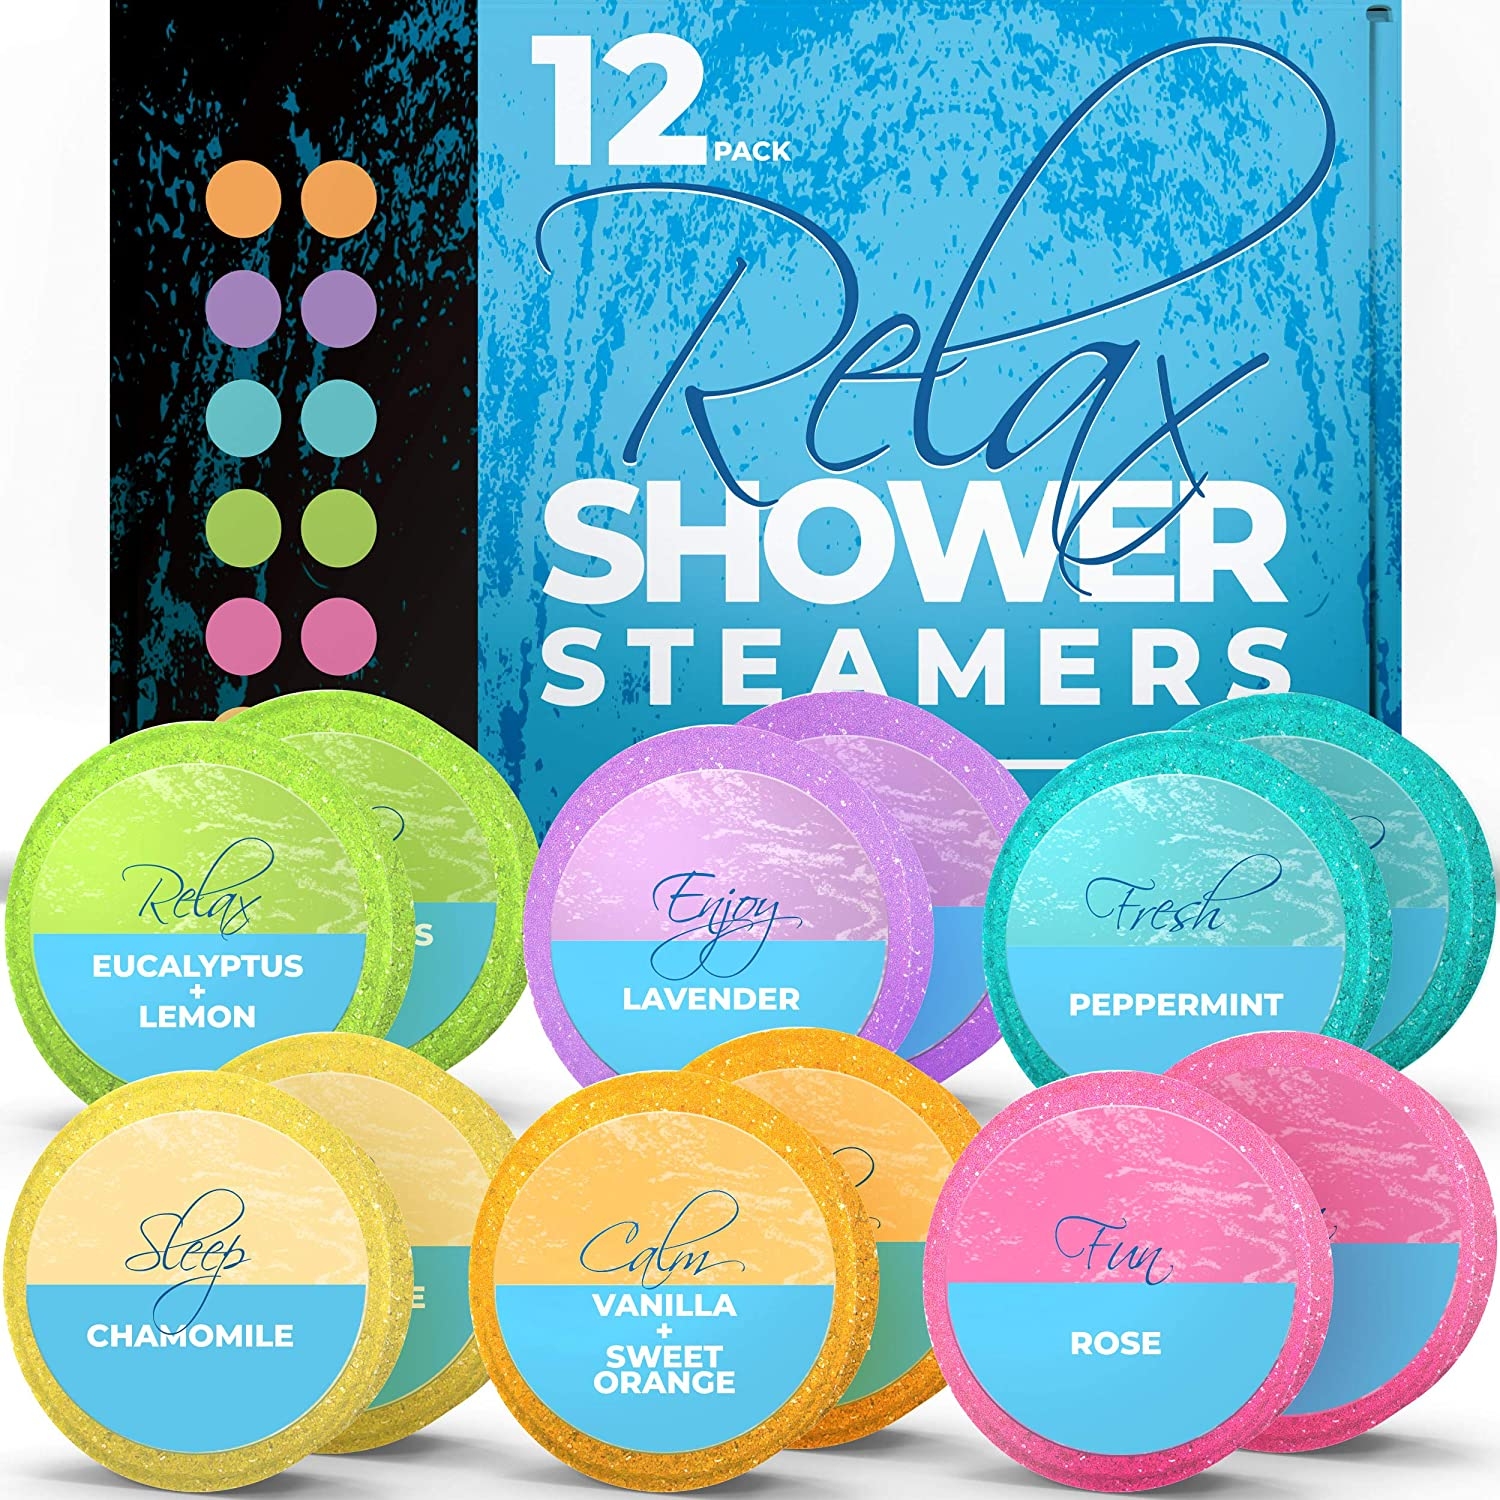 Shower Steamers Aromatherapy (12-Pack XXL Shower Vapor Tabs) - Shower Bombs for Women, Shower Tablets Aromatherapy (Assorted Essential Oils), Shower Aromatherapy Steamers for Relaxation and Wellness